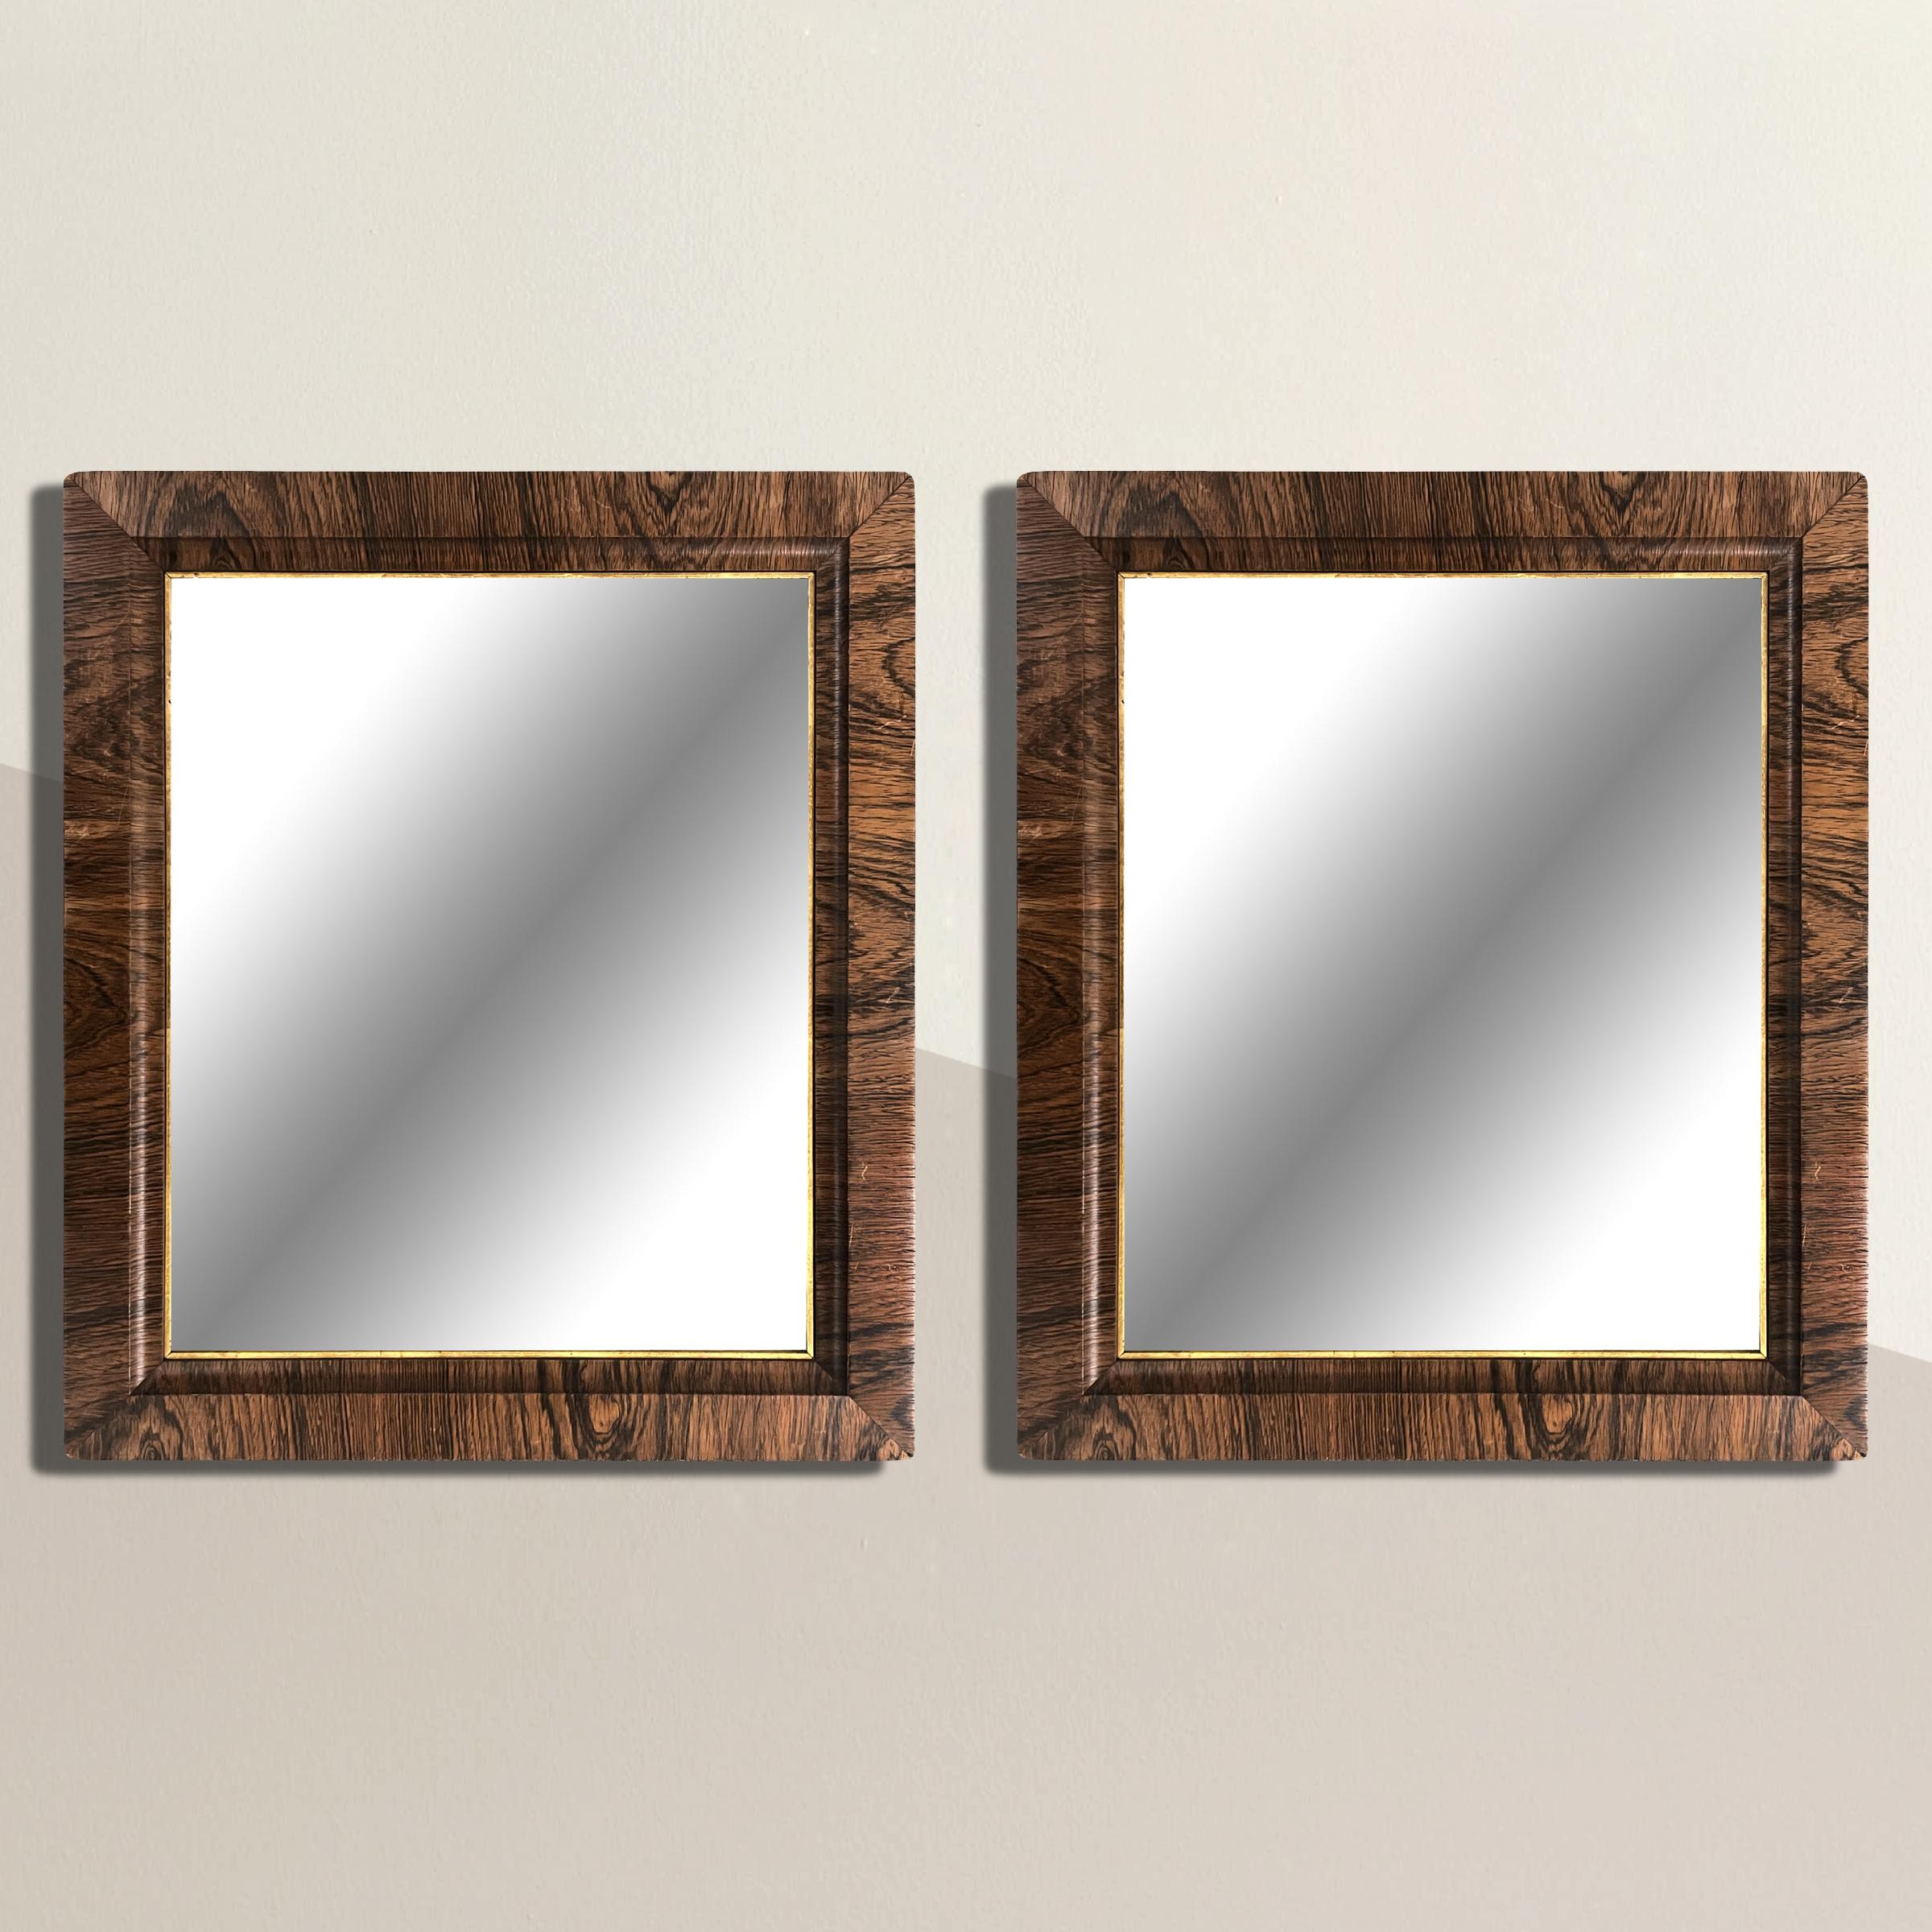 A bold pair of 19th century American framed mirrors with the most wonderful weathered oak veneer frames, and gold leaf fillets. Perfect above a pair of console tables, nightstands, or flanking any doorway in your home.